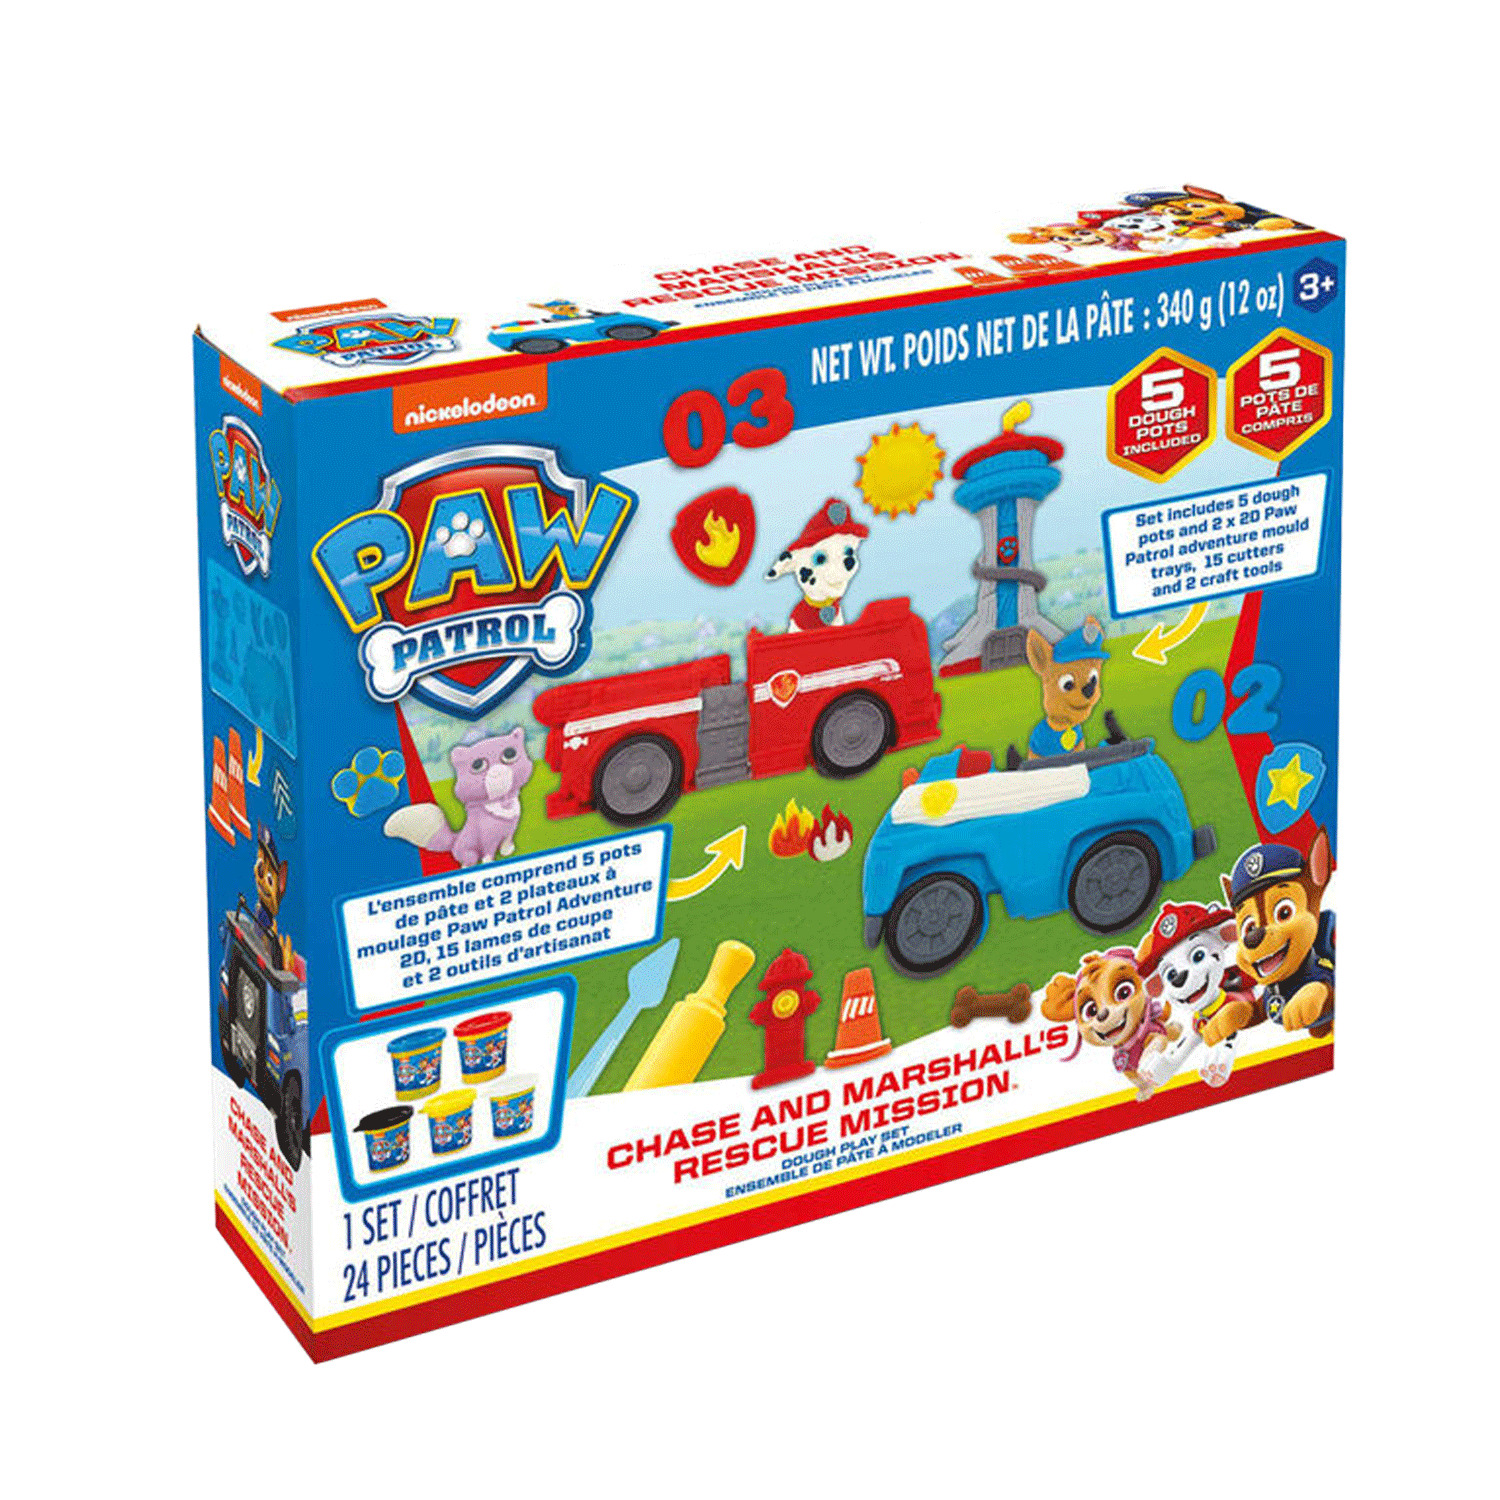 https://www.rossy.ca/media/A2W/products/nickelodeon-paw-patrol-chase-and-marshalls-rescue-mission-jeu-de-pate-a-modeler-85442-1.jpg